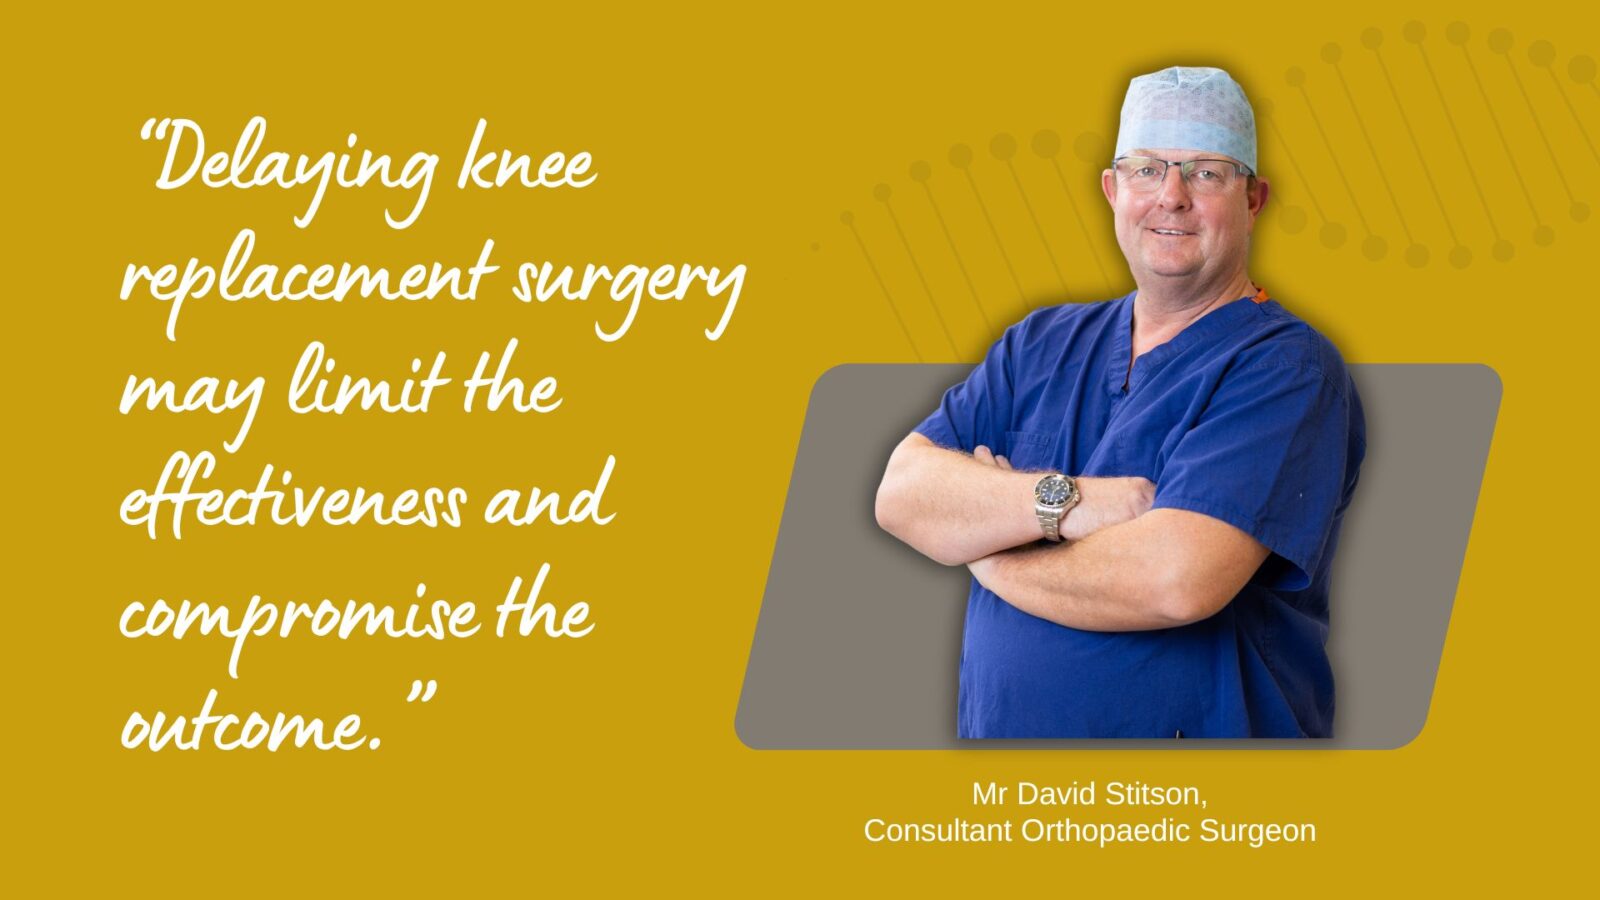 Delaying surgery may limit the effectiveness of knee replacement and compromise the outcome.